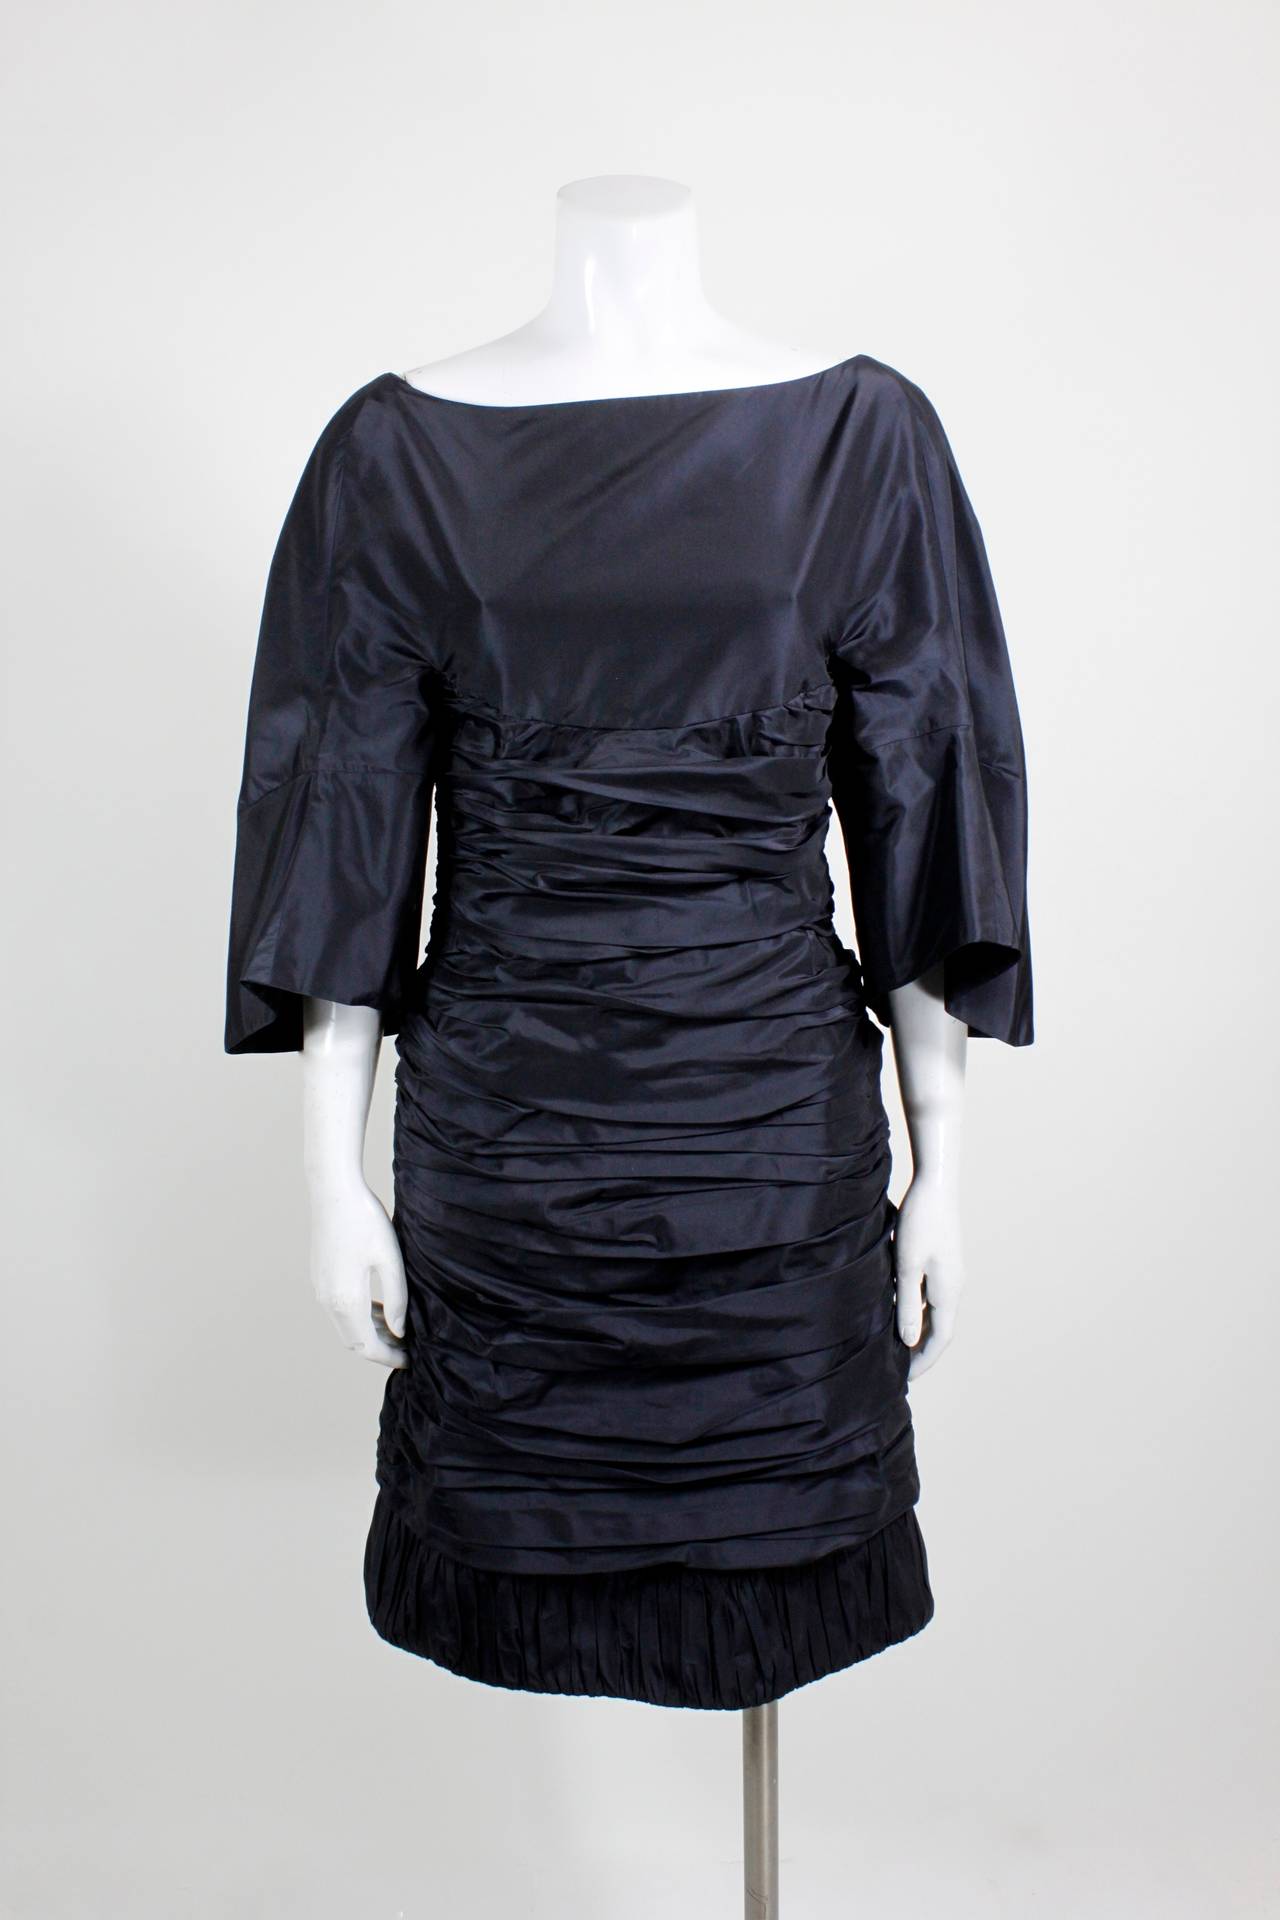 A stunning black taffeta cocktail dress from Ralph Rucci. An architectural bodice is streamlined with a carefully ruched skirt. The back of the gown features a dipped v-back with a tie-back swag: the perfect balance of modernism and femininity.